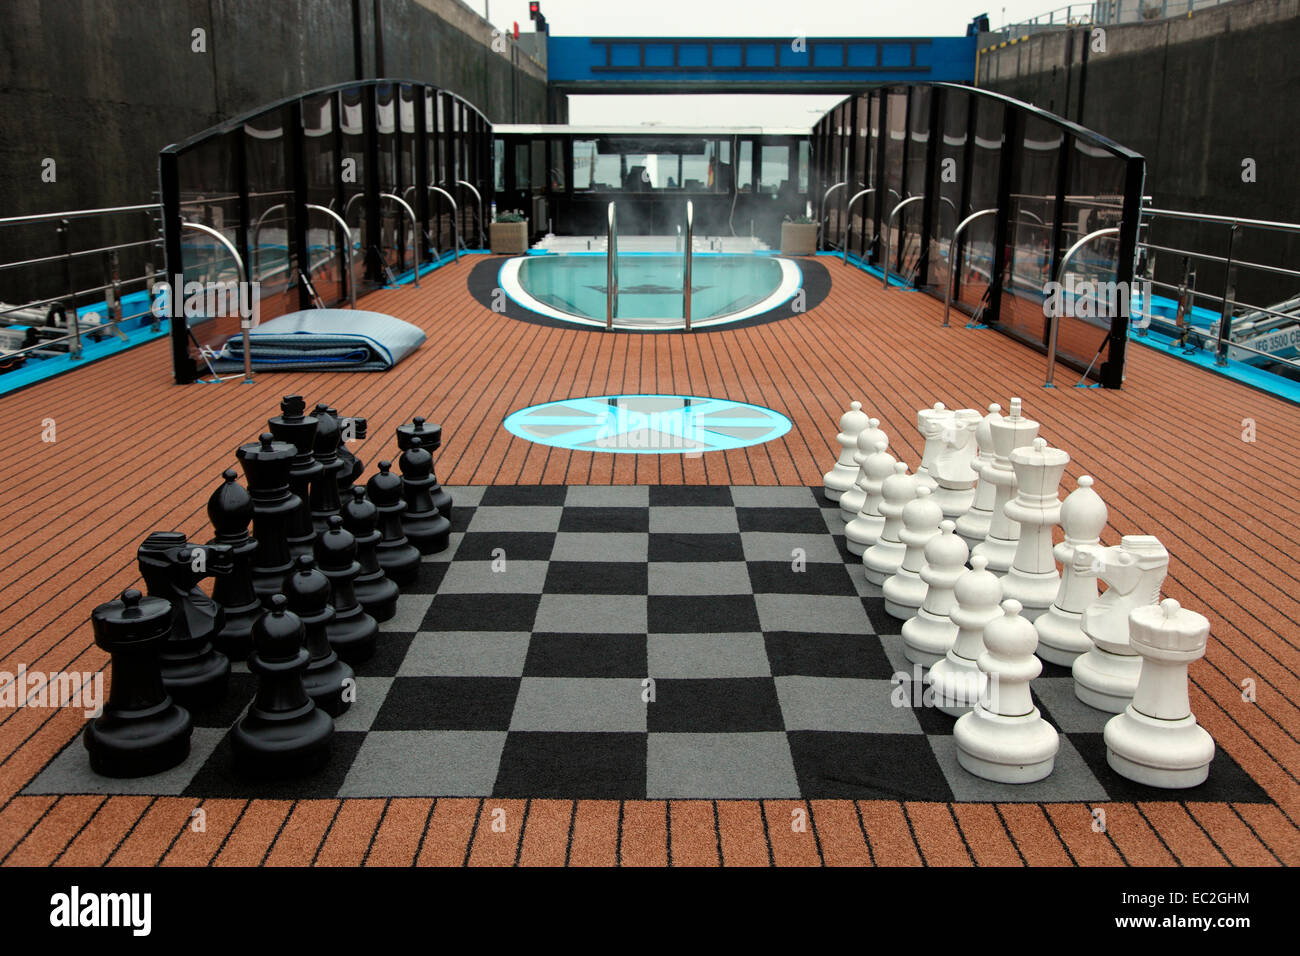 Sun deck of MS Amacerto with chess board and swimmingpool as it goes through a lock on the River Rhine. Stock Photo